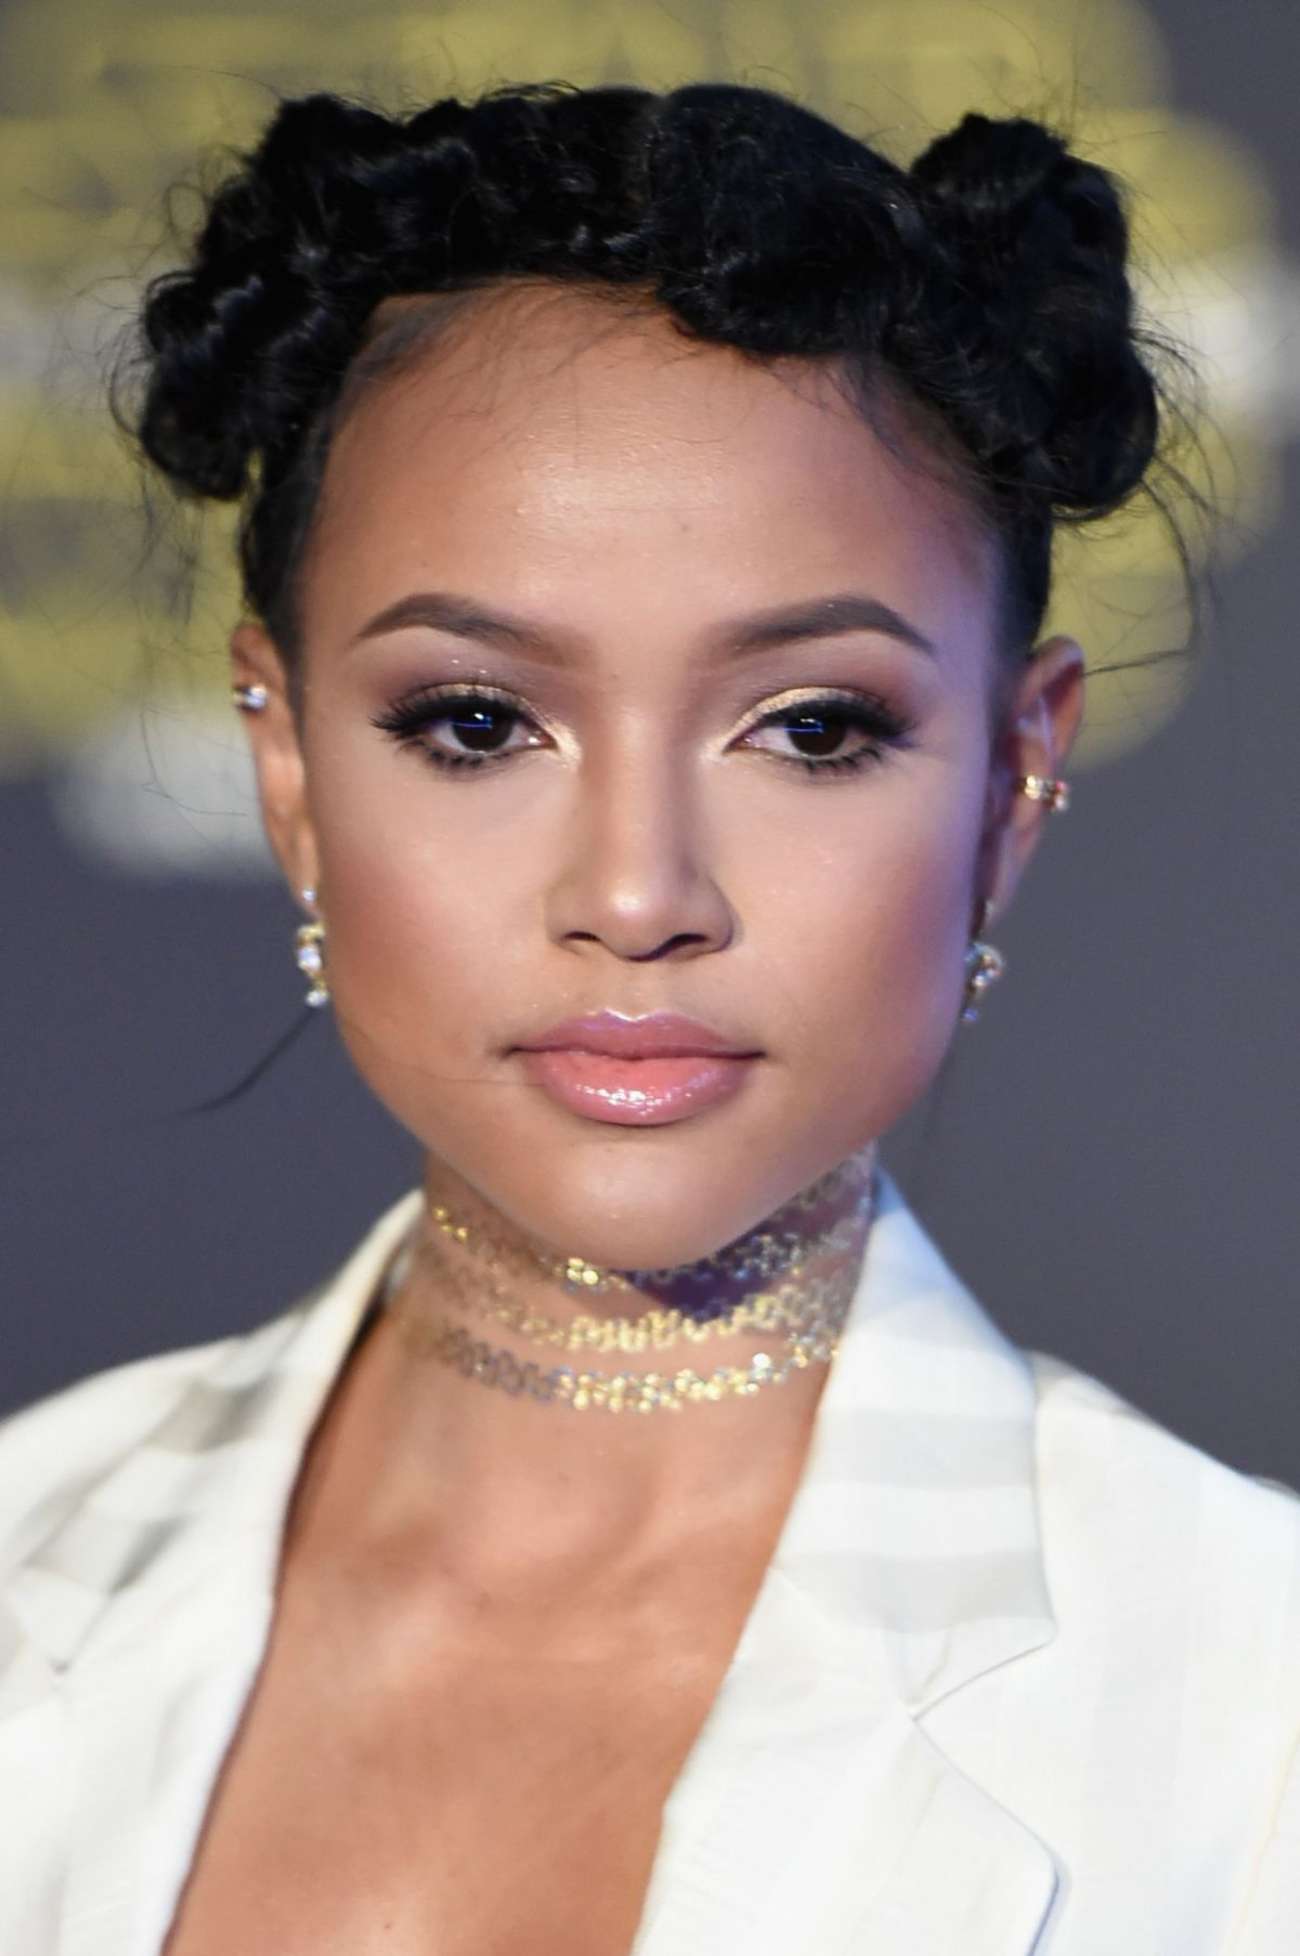 Karreuche Tran Star Wars The Force Awakens Premiere in Hollywood